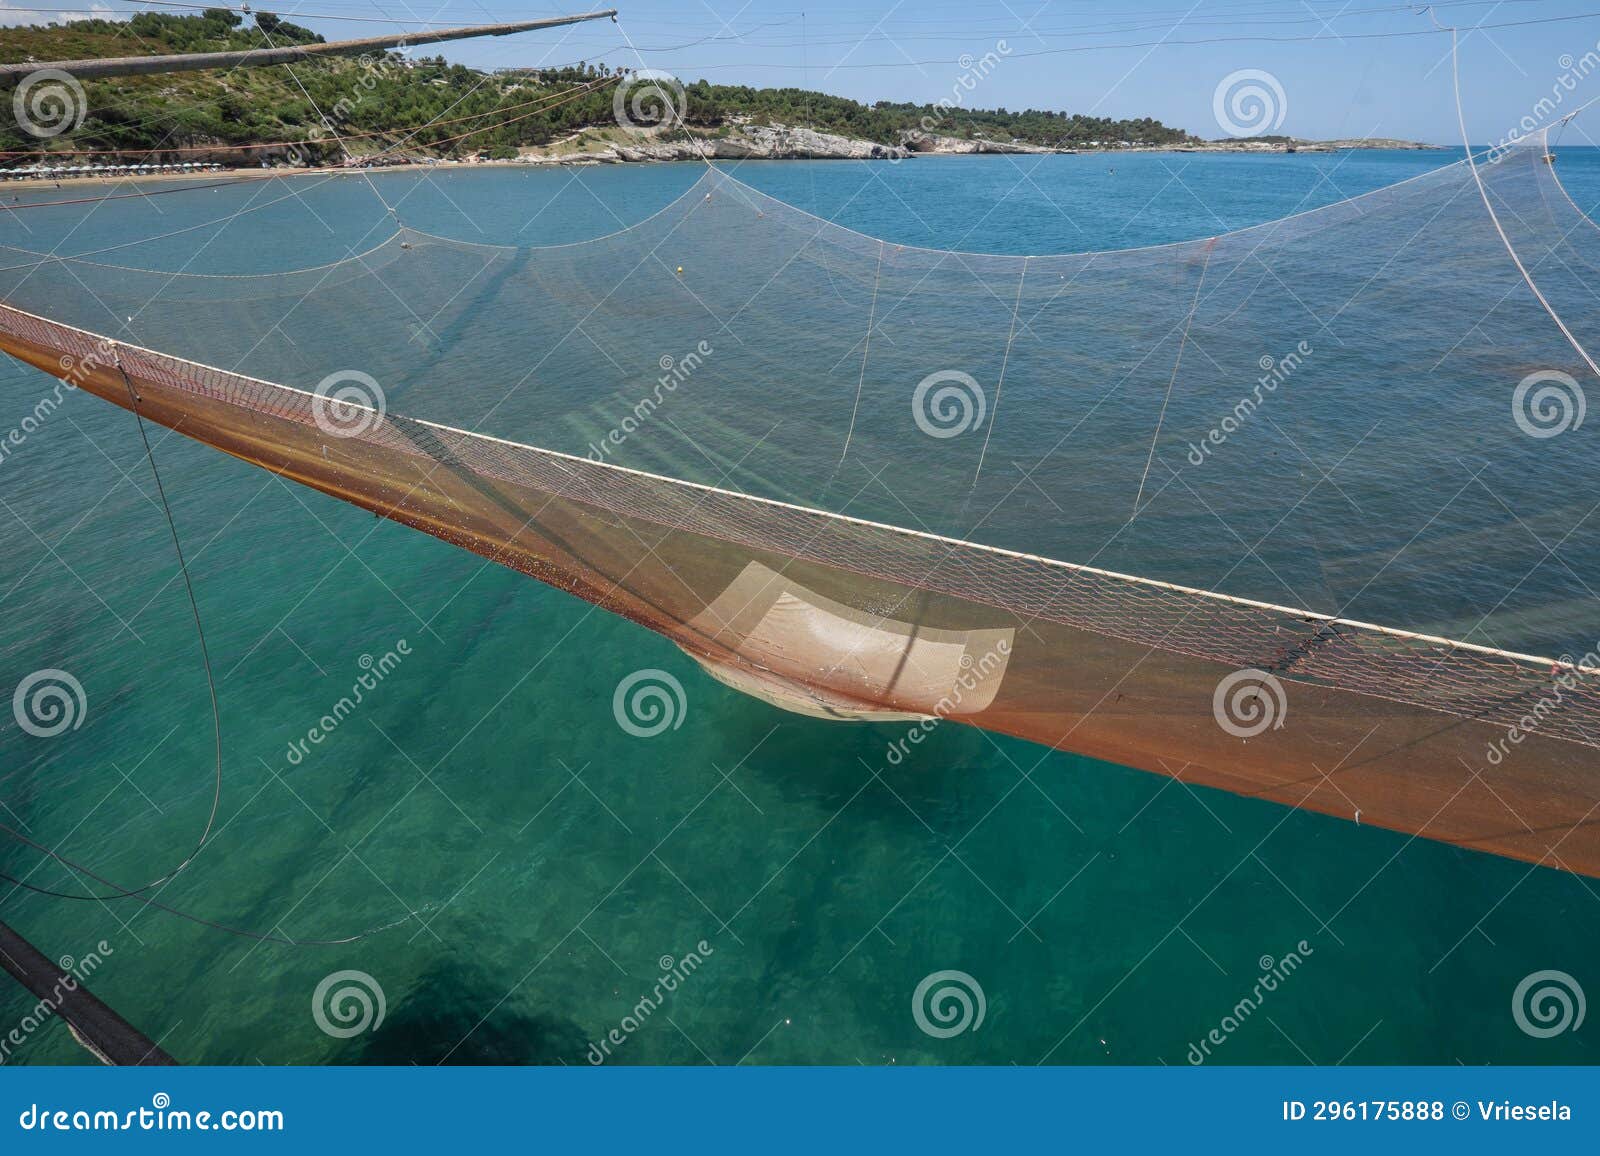 Huge Fishing Net is Pulled Up by Ropes in a Traditional Fishing Trabucco in  Italy Stock Photo - Image of coast, italy: 296175888